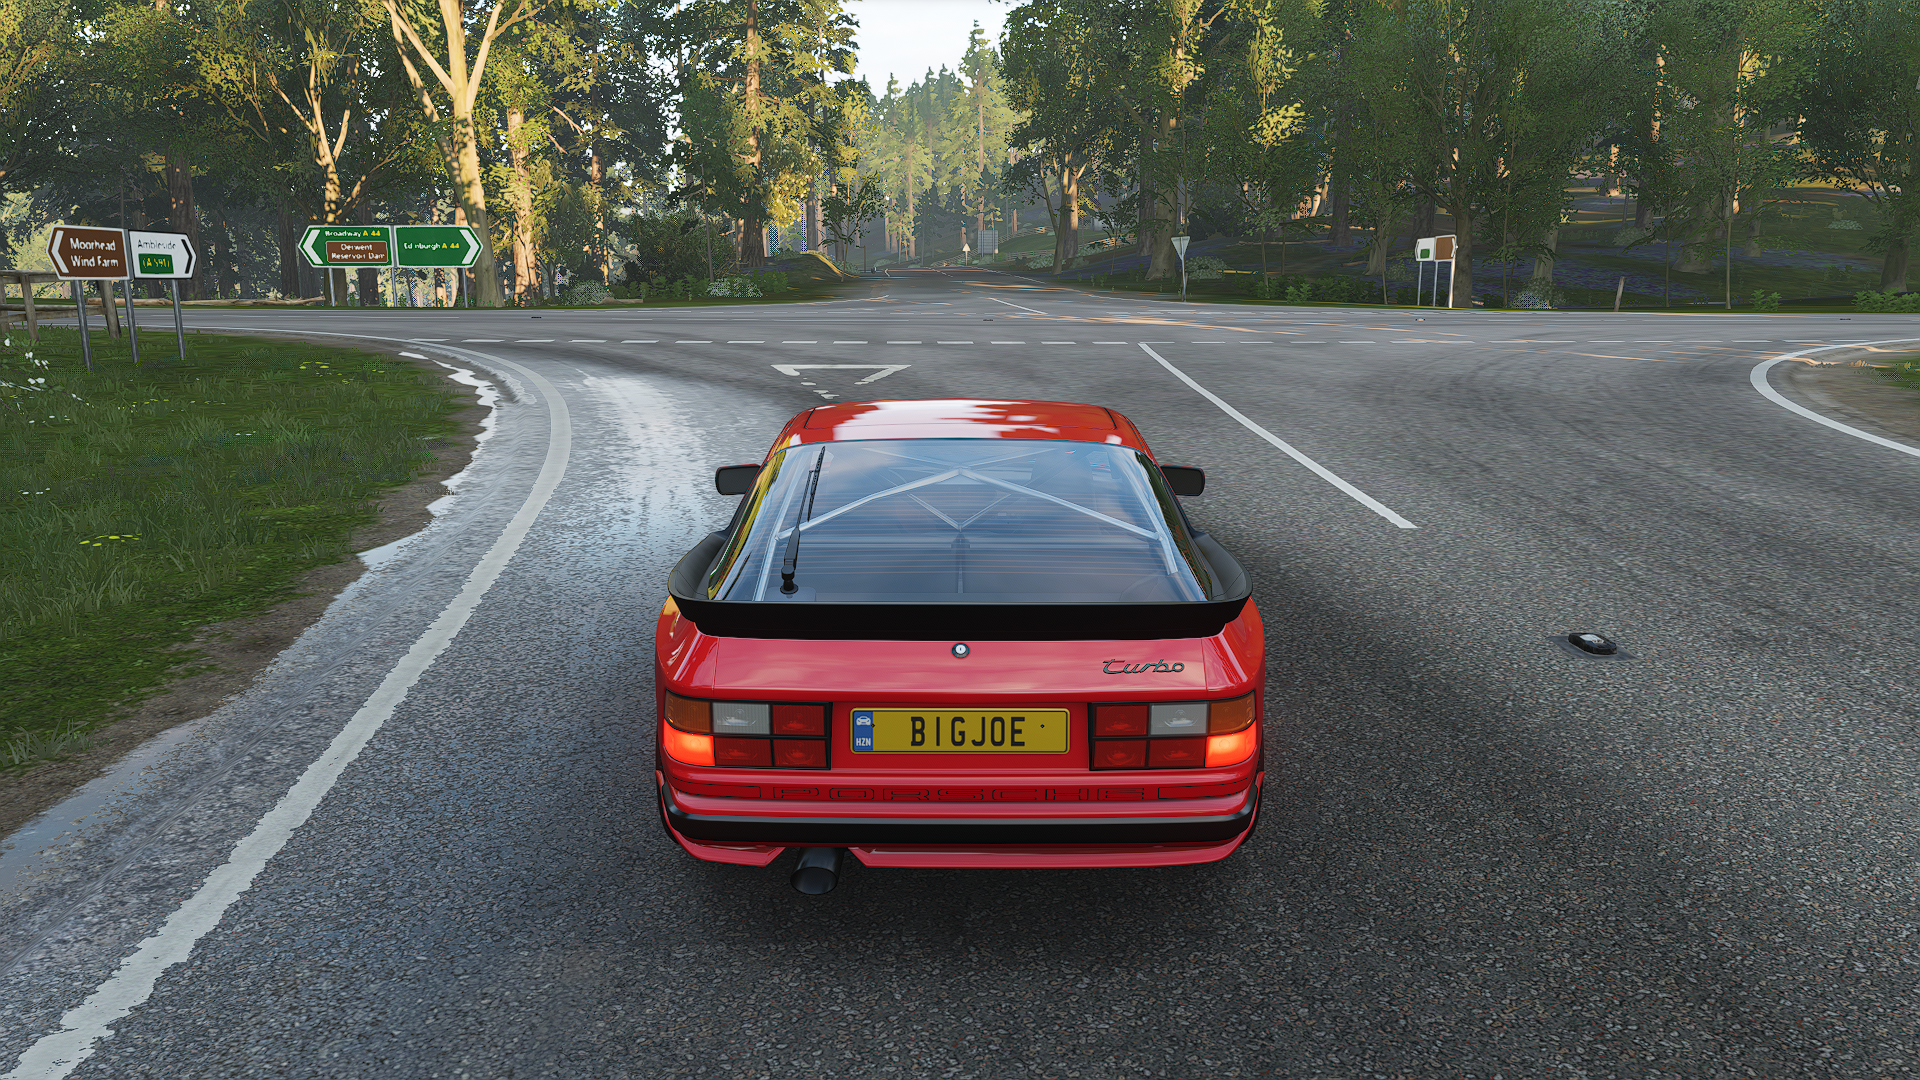 General 1920x1080 Forza Forza Horizon Forza Horizon 4 car racing video games rear view licence plates road CGI taillights trees signs Porsche German cars Volkswagen Group PlaygroundGames